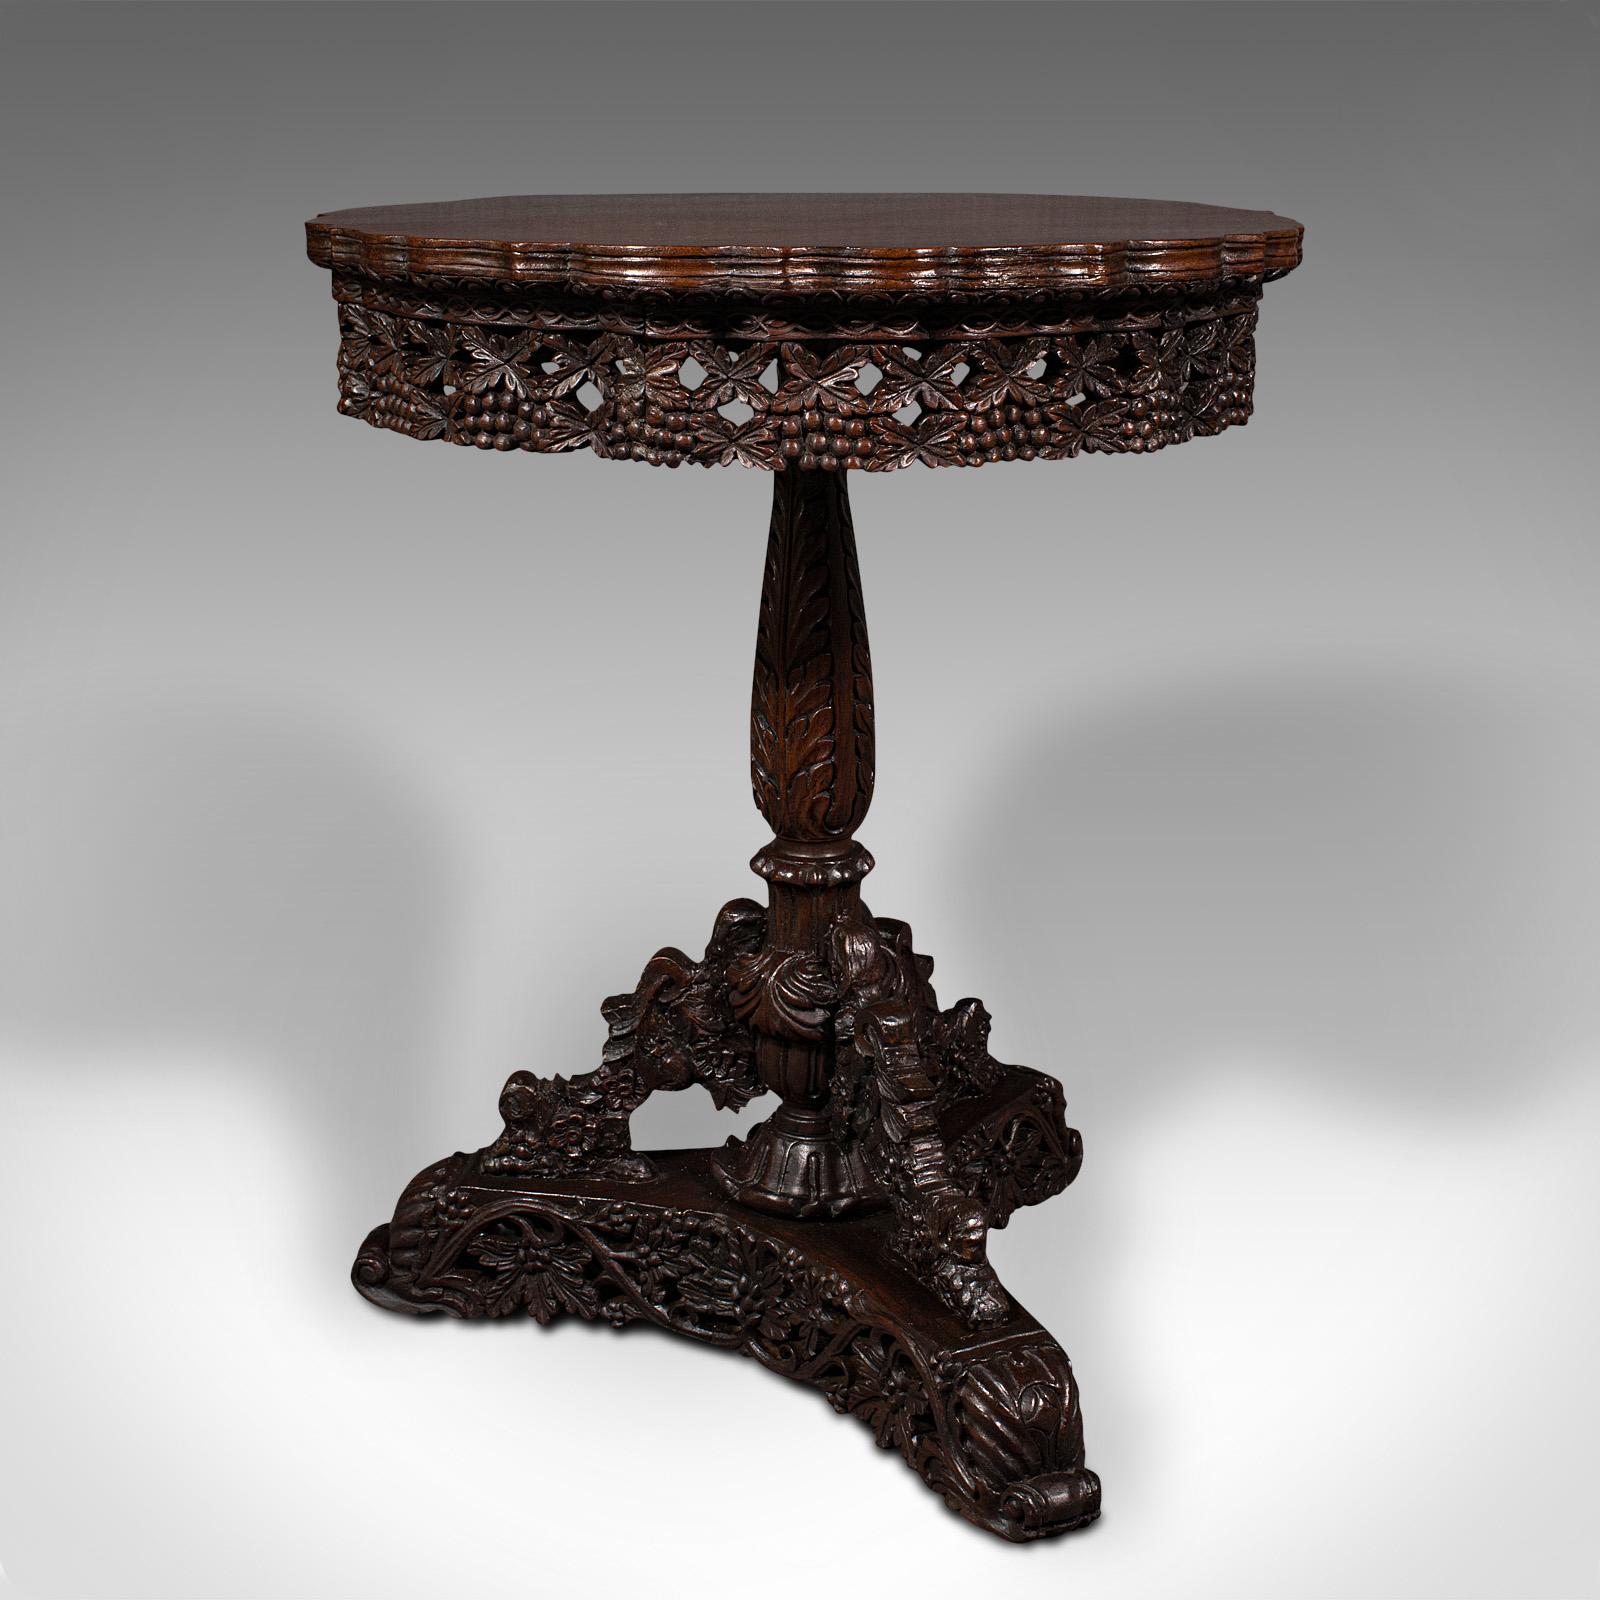 Antique Carved Lamp Table, Anglo Indian, Teak, Tilt Top, Colonial, Victorian In Good Condition For Sale In Hele, Devon, GB